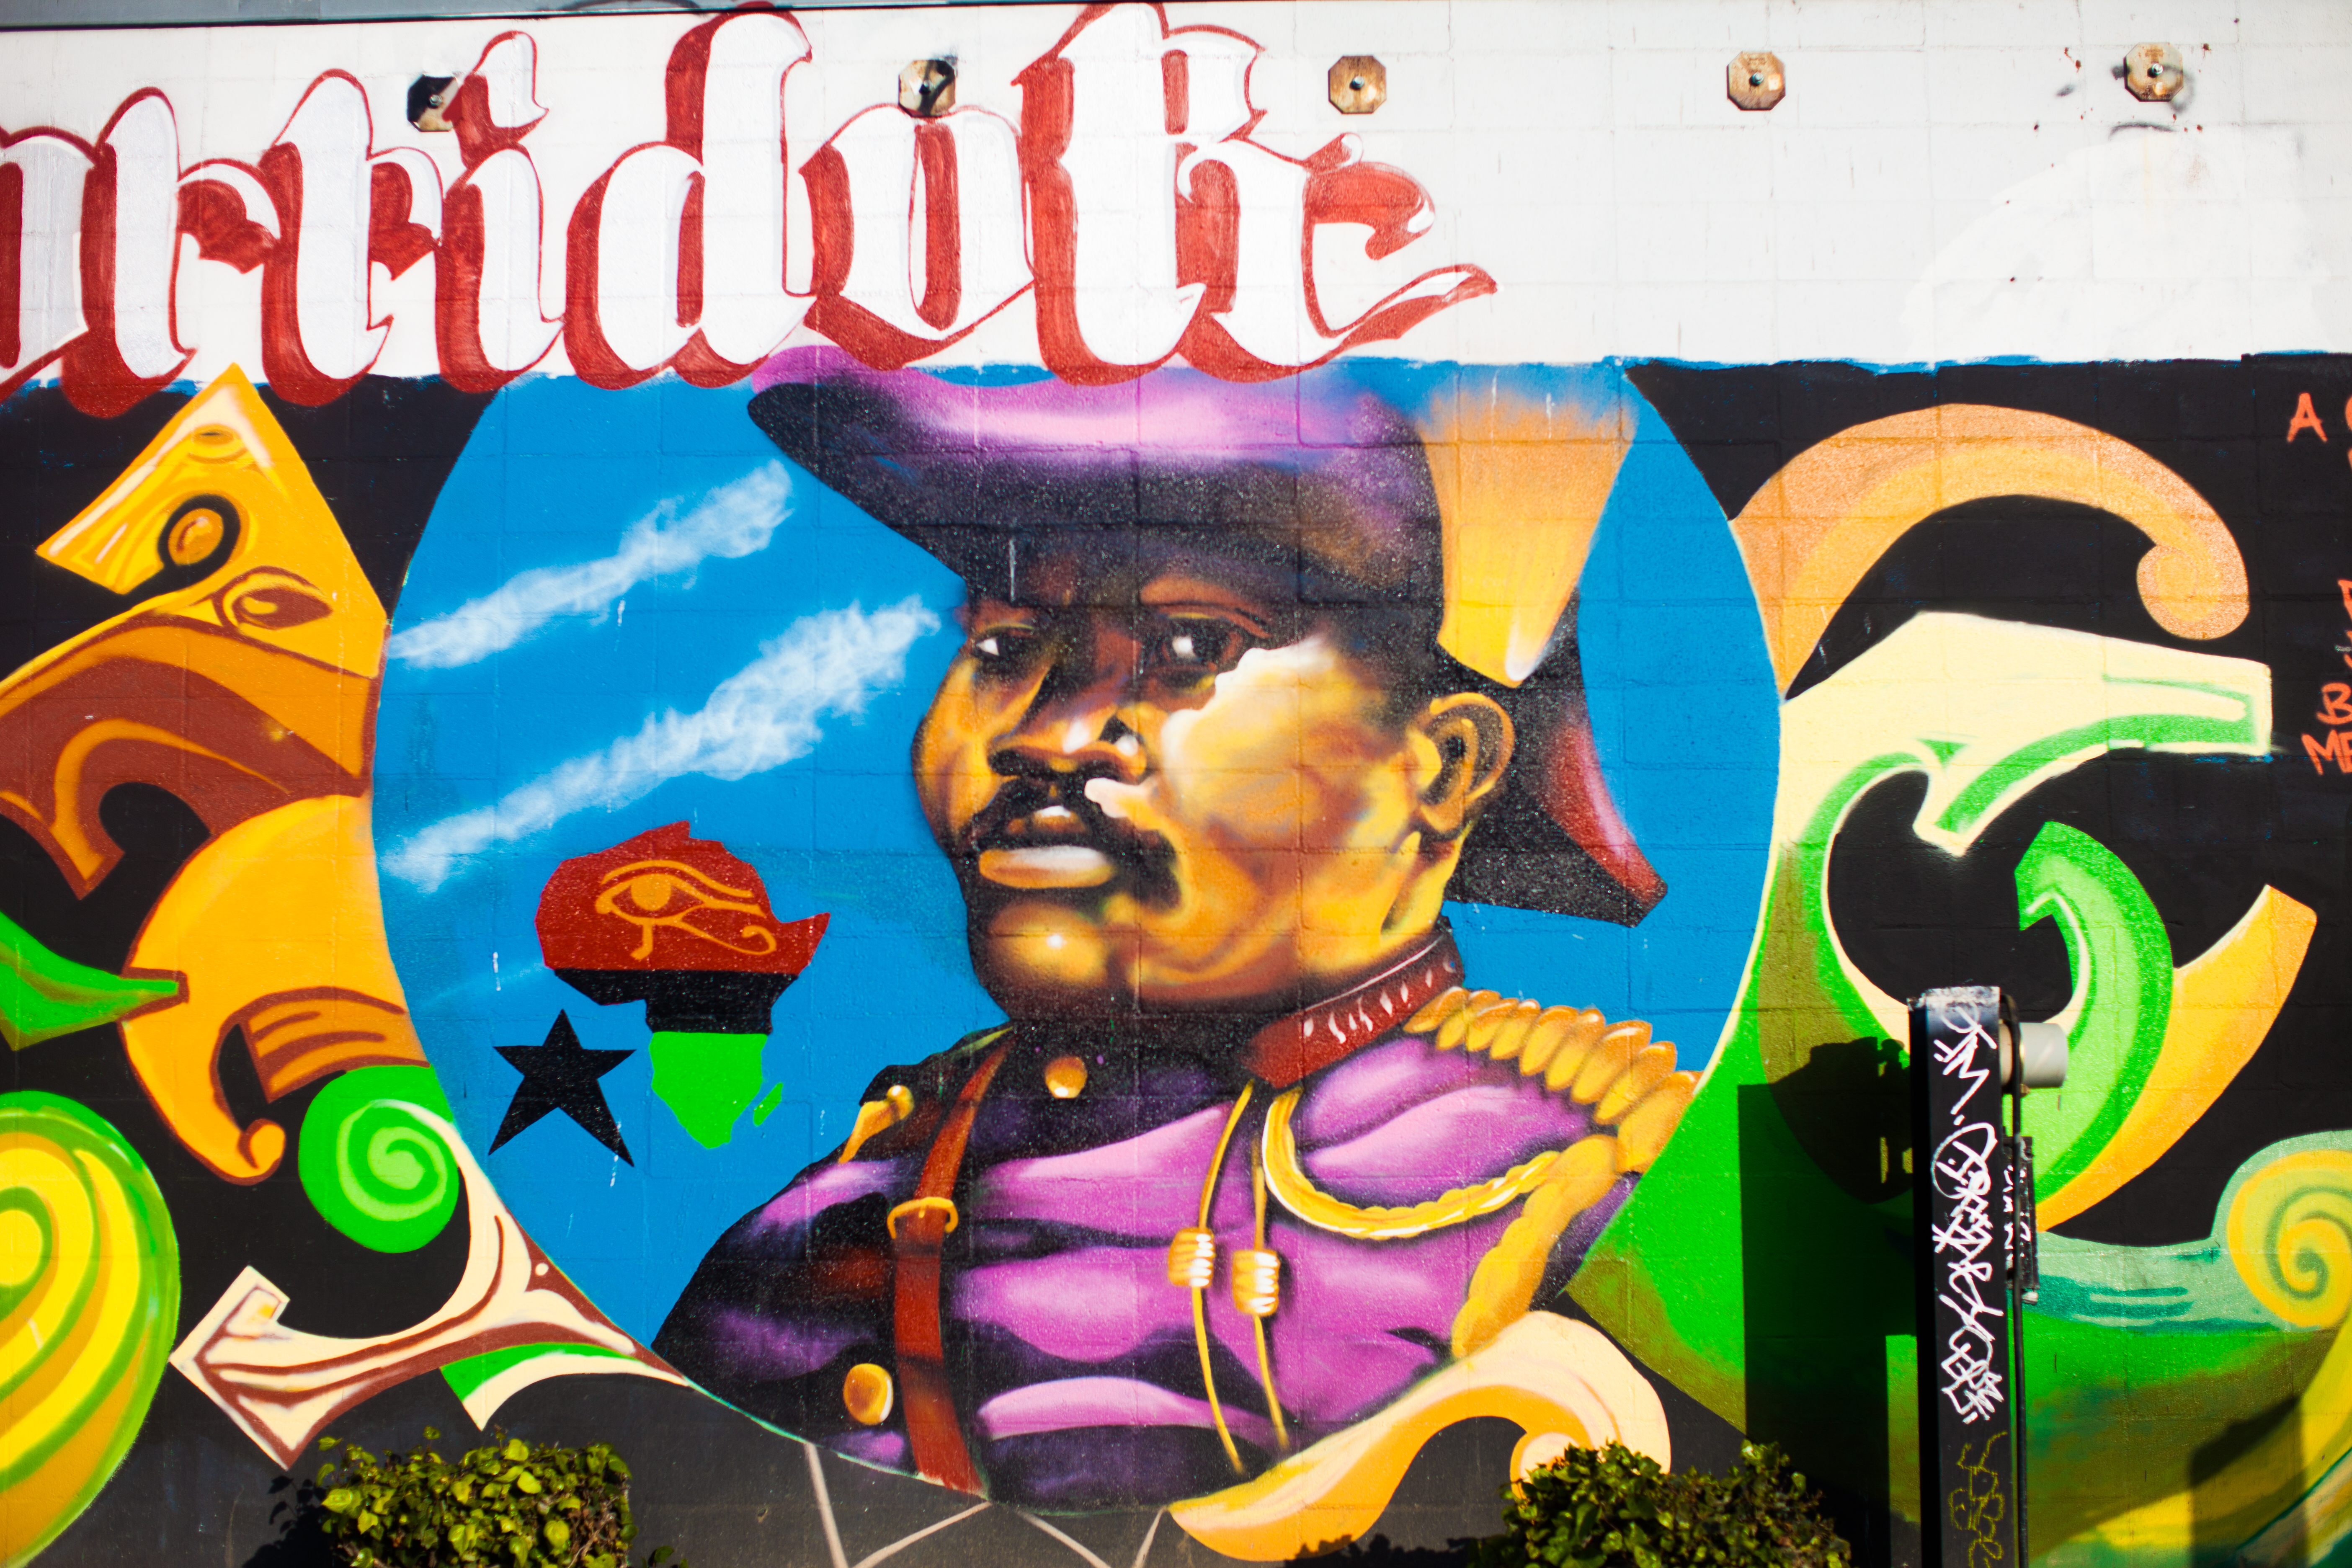 Marcus Garvey's mural in Oakland, California, sporting a military officer’s outfit in royal purple hue